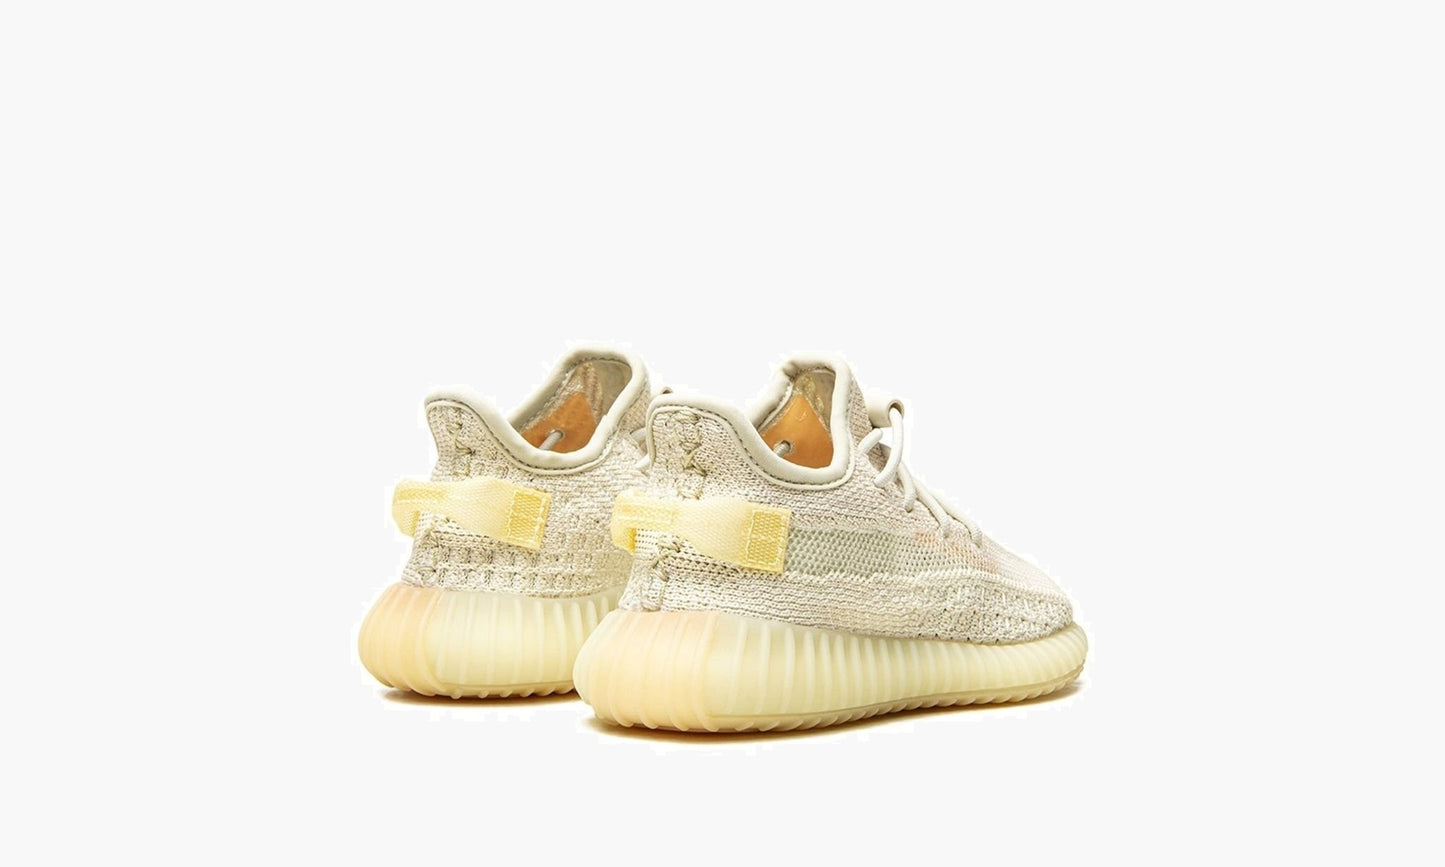 Adidas Yeezy Boost 350 V2 Infant Light - GY3440 | The Sortage